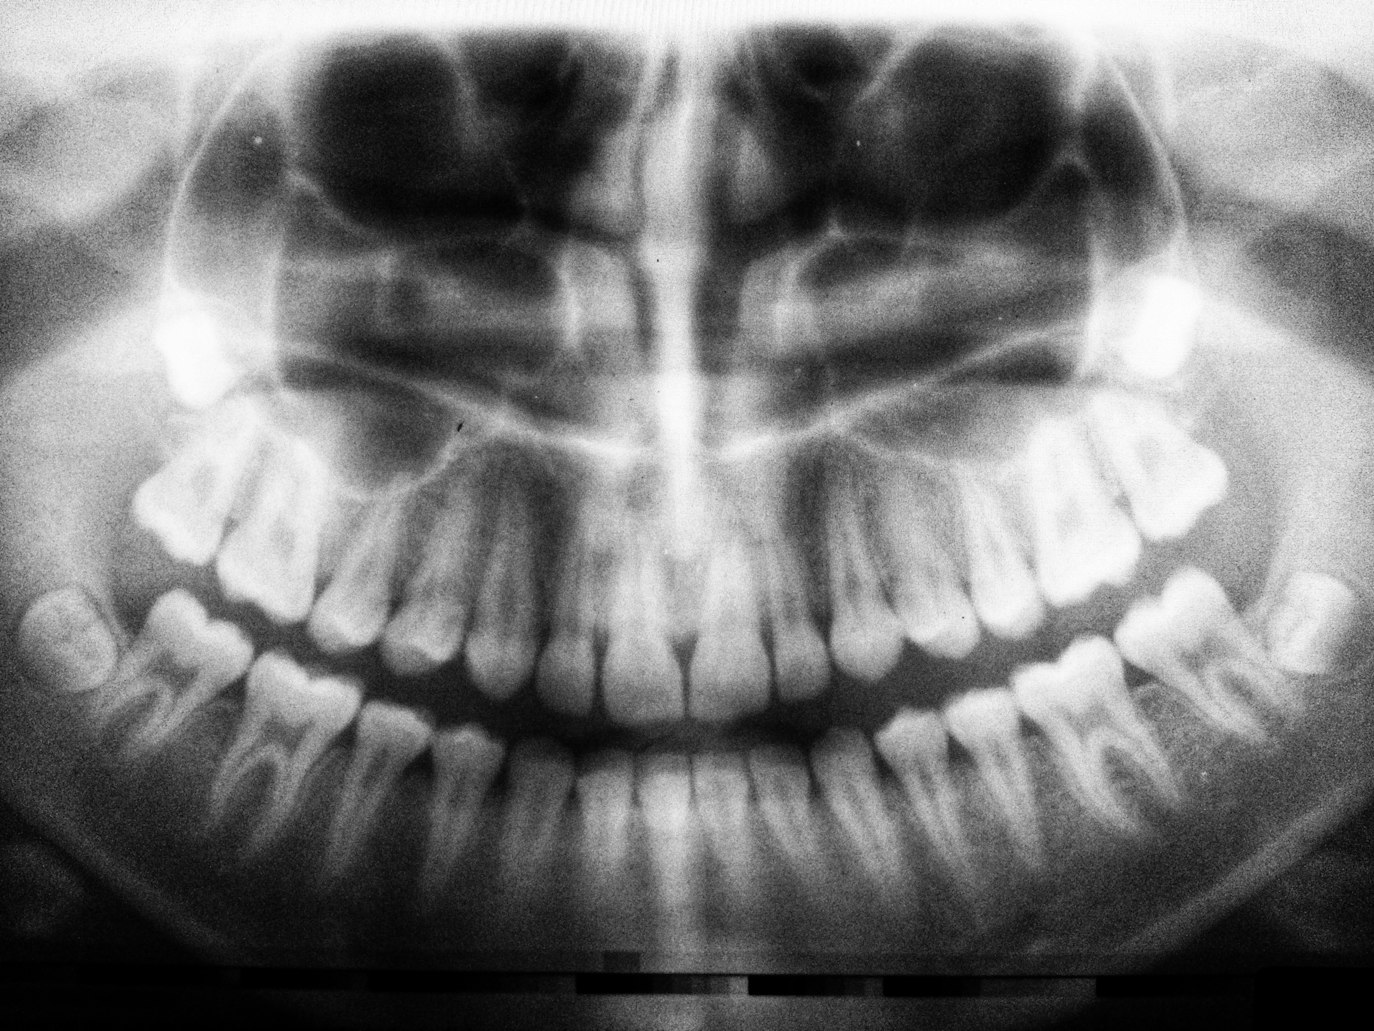 X-ray of person's mouth